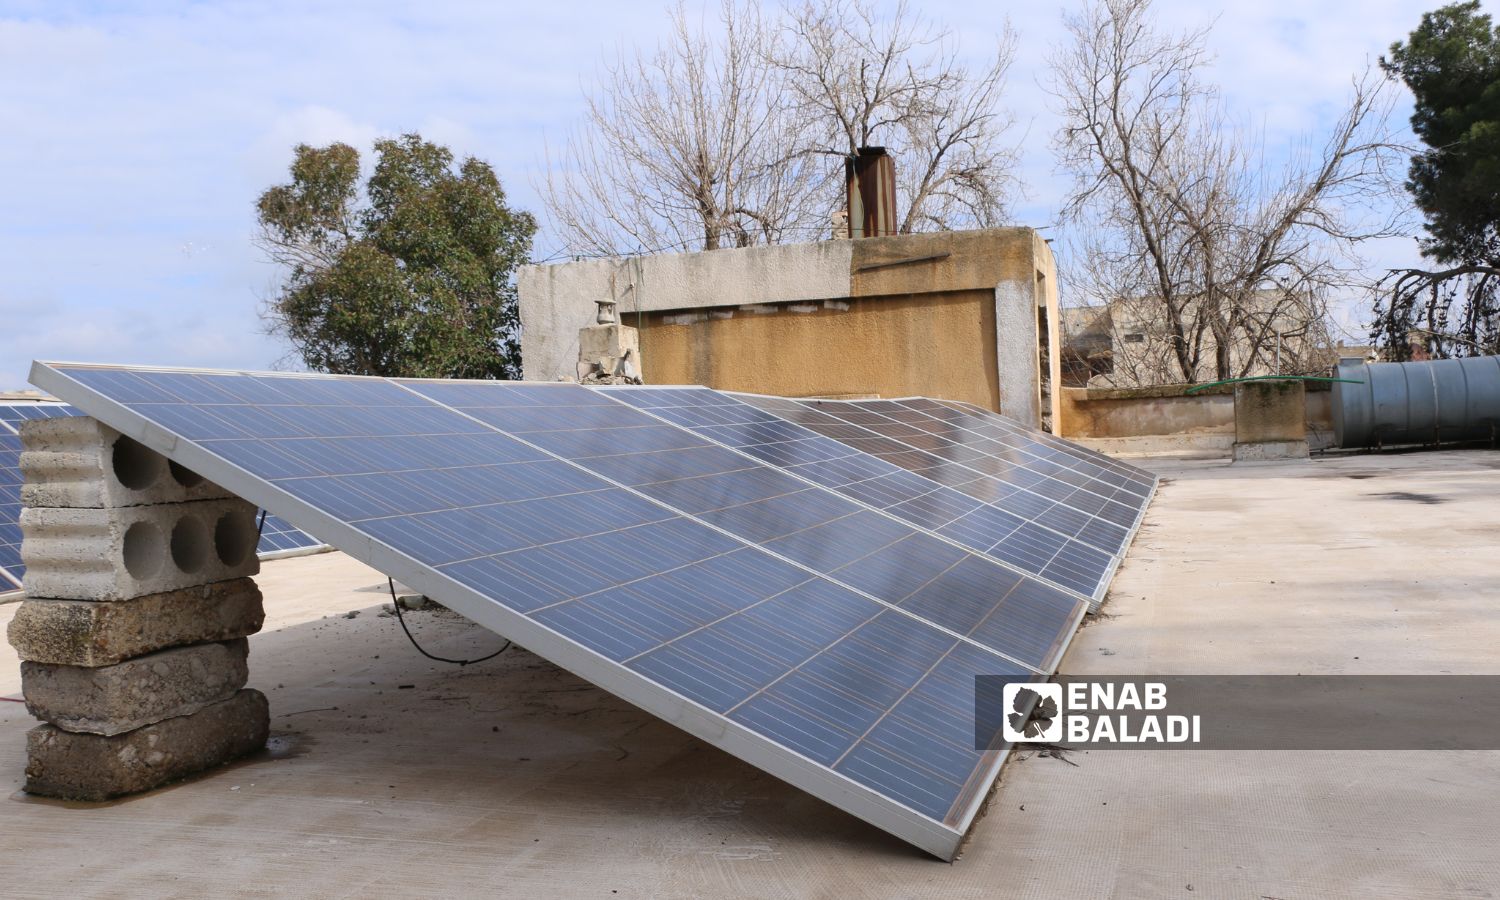 Solar panels are less effective in winter due to cloudy weather - February 16, 2024 (Enab Baladi)